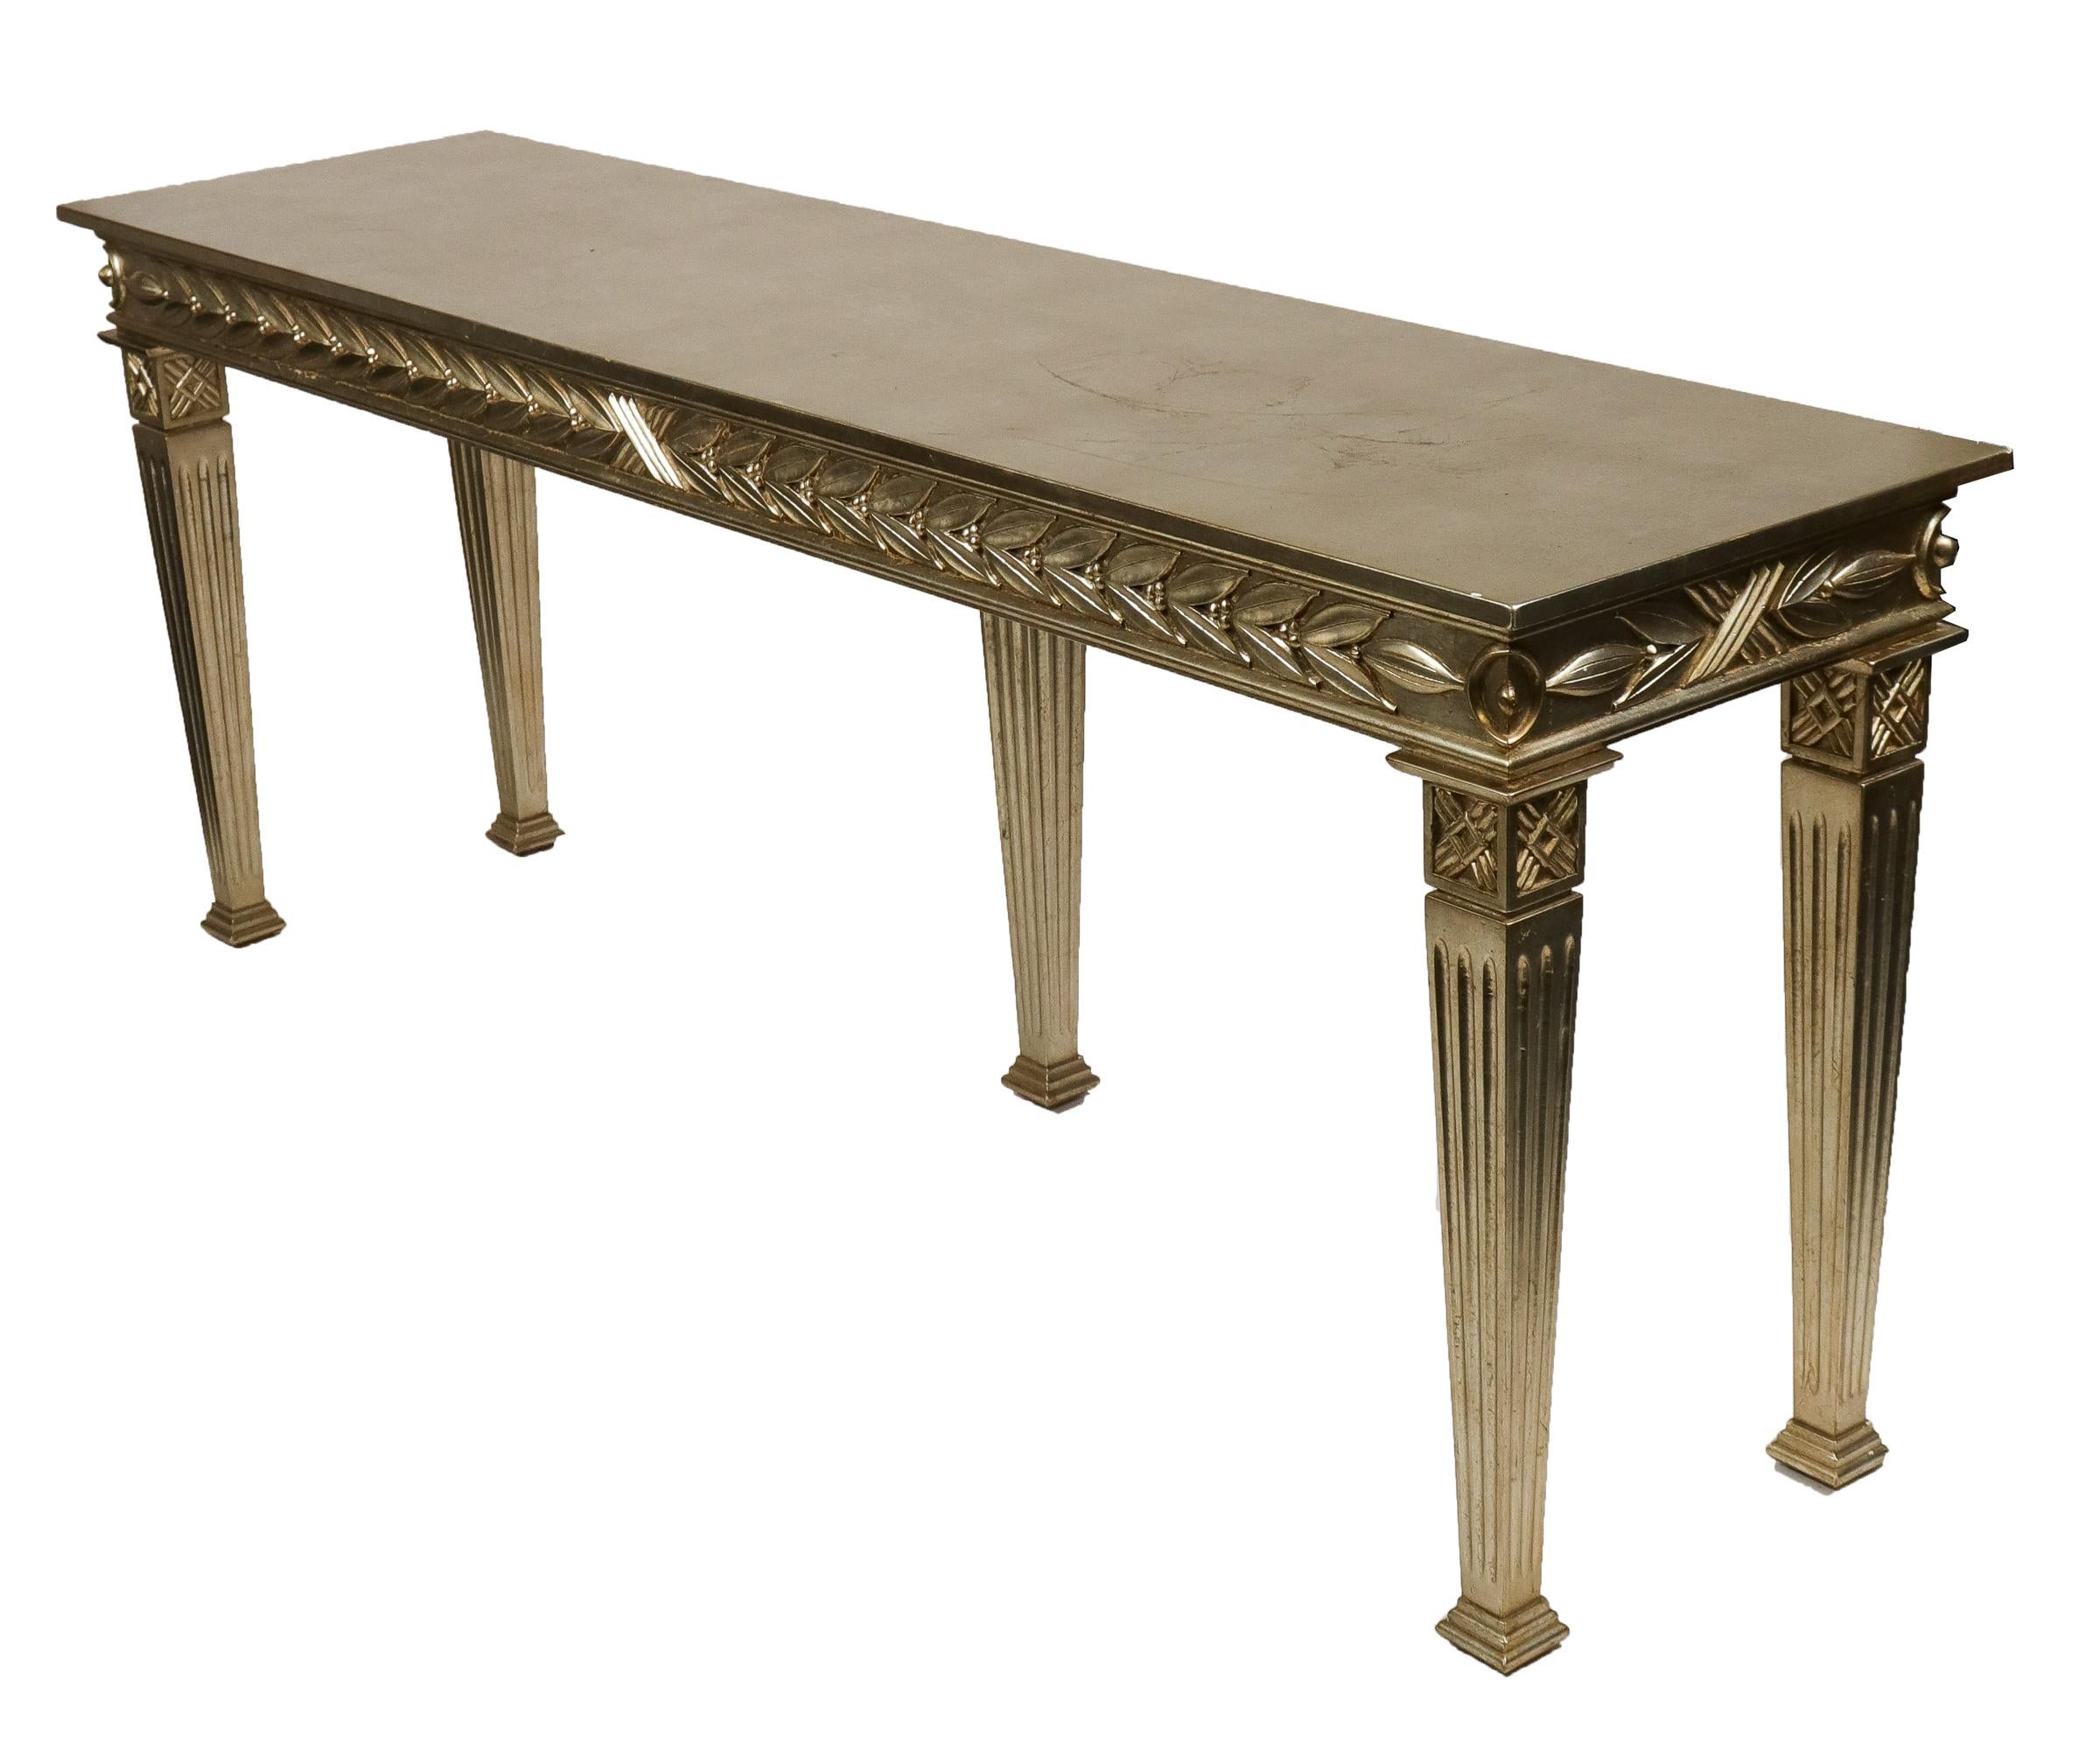 Italian neoclassical manner silver-tone painted / silver-gilt console table, 20th century. Measures: 31.5